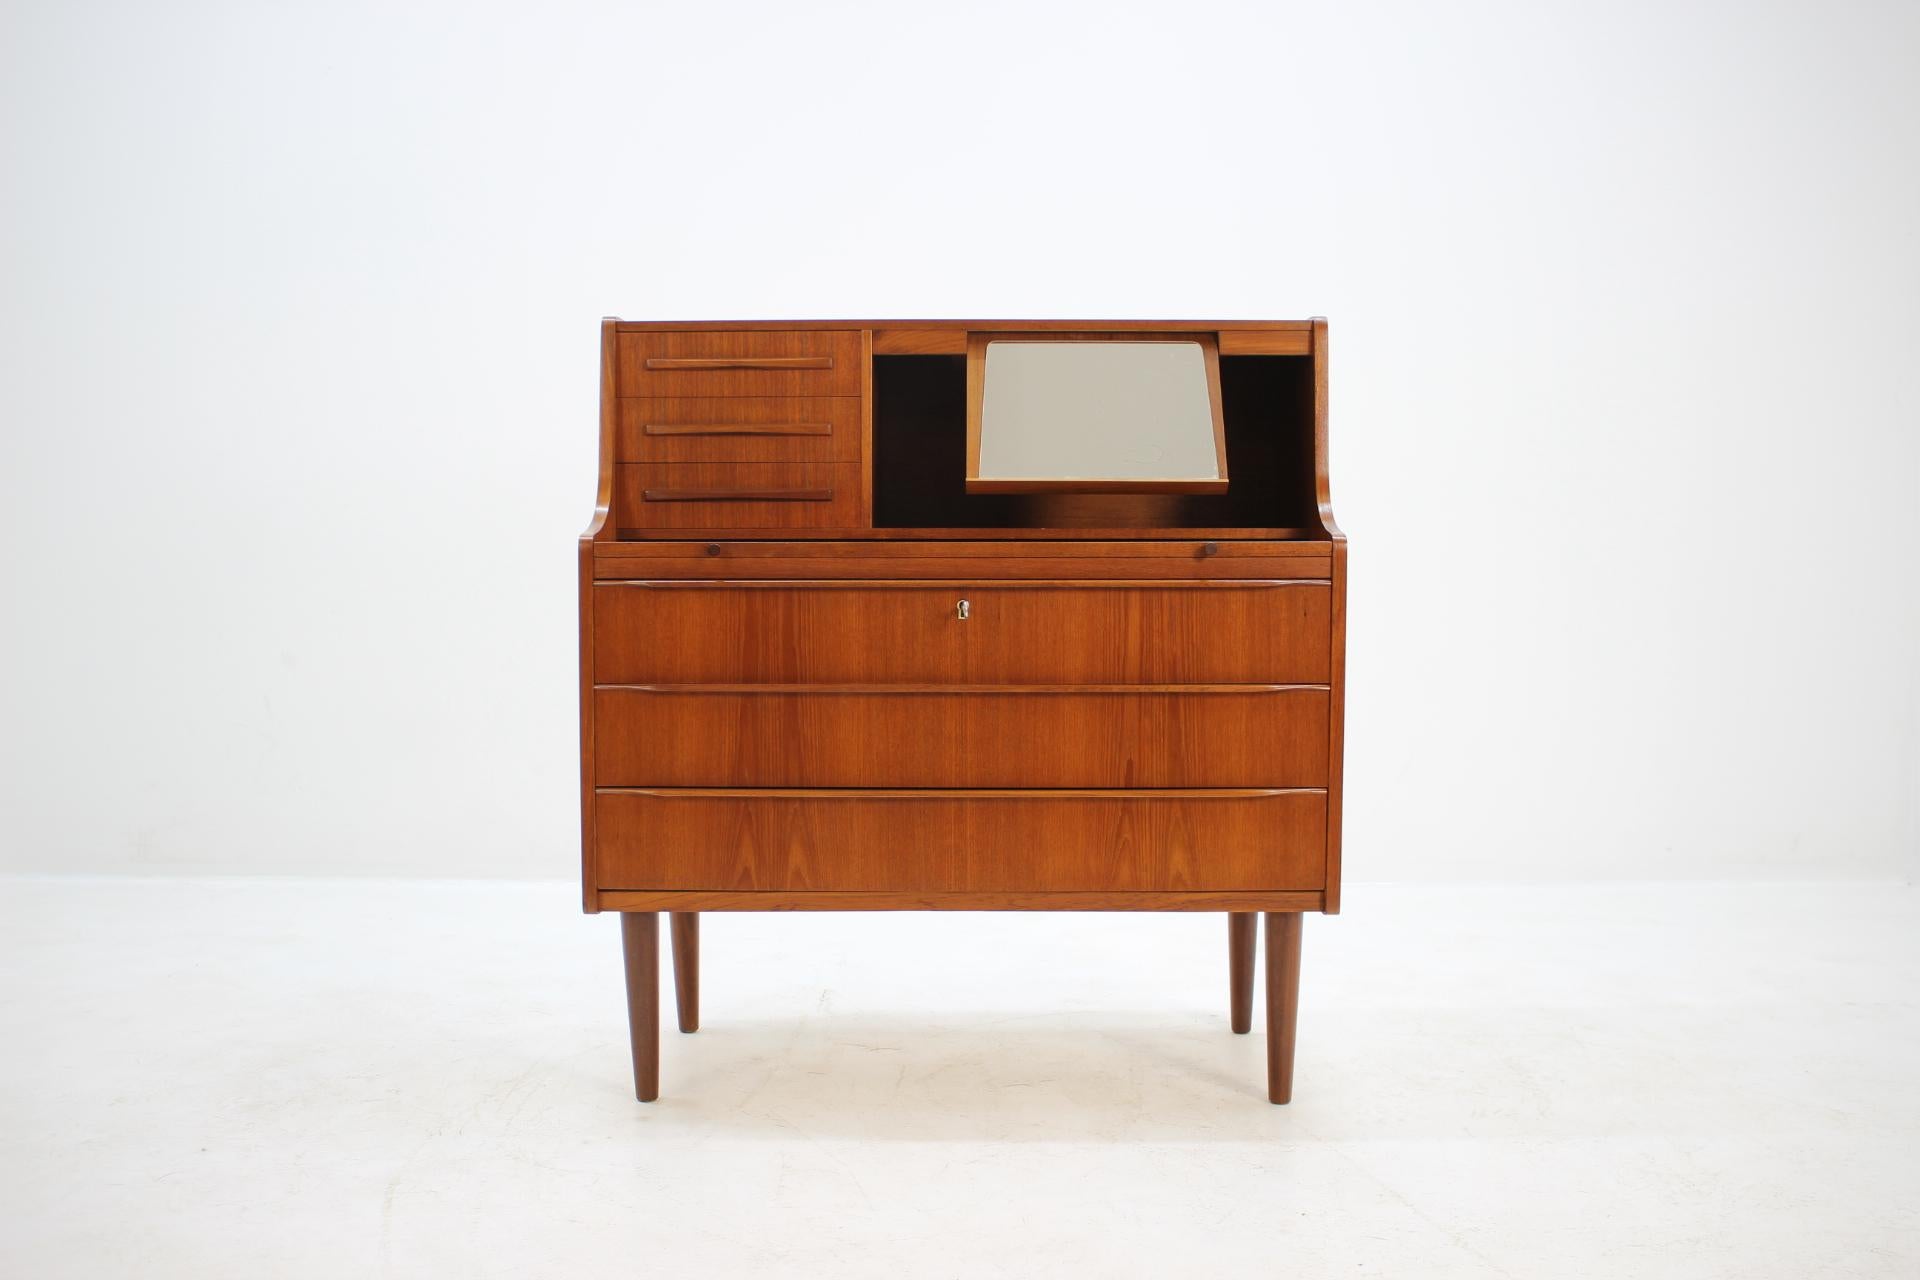 This Danish teak writing cabinet features six drawers and shelves. The extendable writing area desk can be extended up to 64 cm. This item was carefully refurbished.